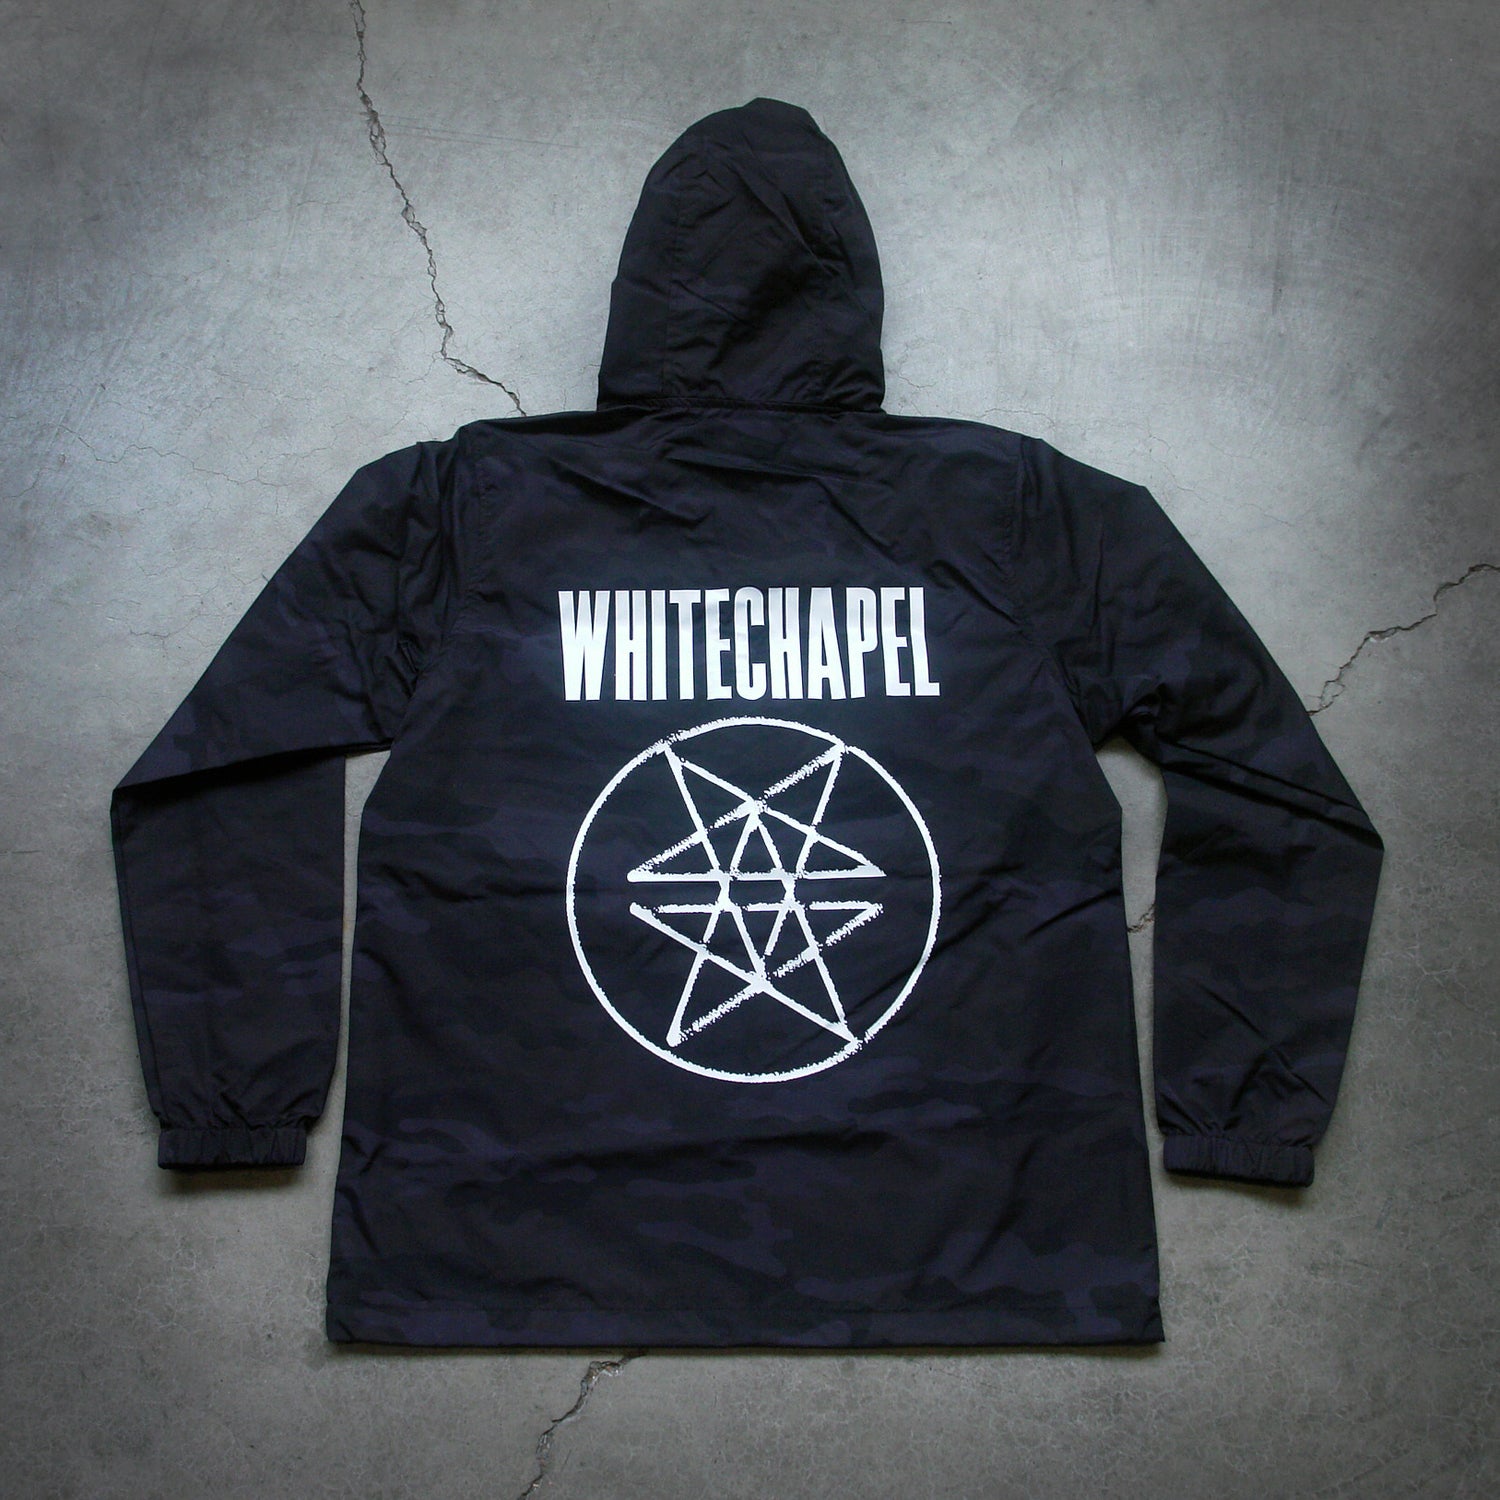 Image of the back of a black pullover windbreaker against a grey concrete background. Across the shoulder area of the jacket in big white letters says "whitechapel". Below that is what is called a double pentagram, it is a white circle with two stars mirroring each other on the inside of the circle. 